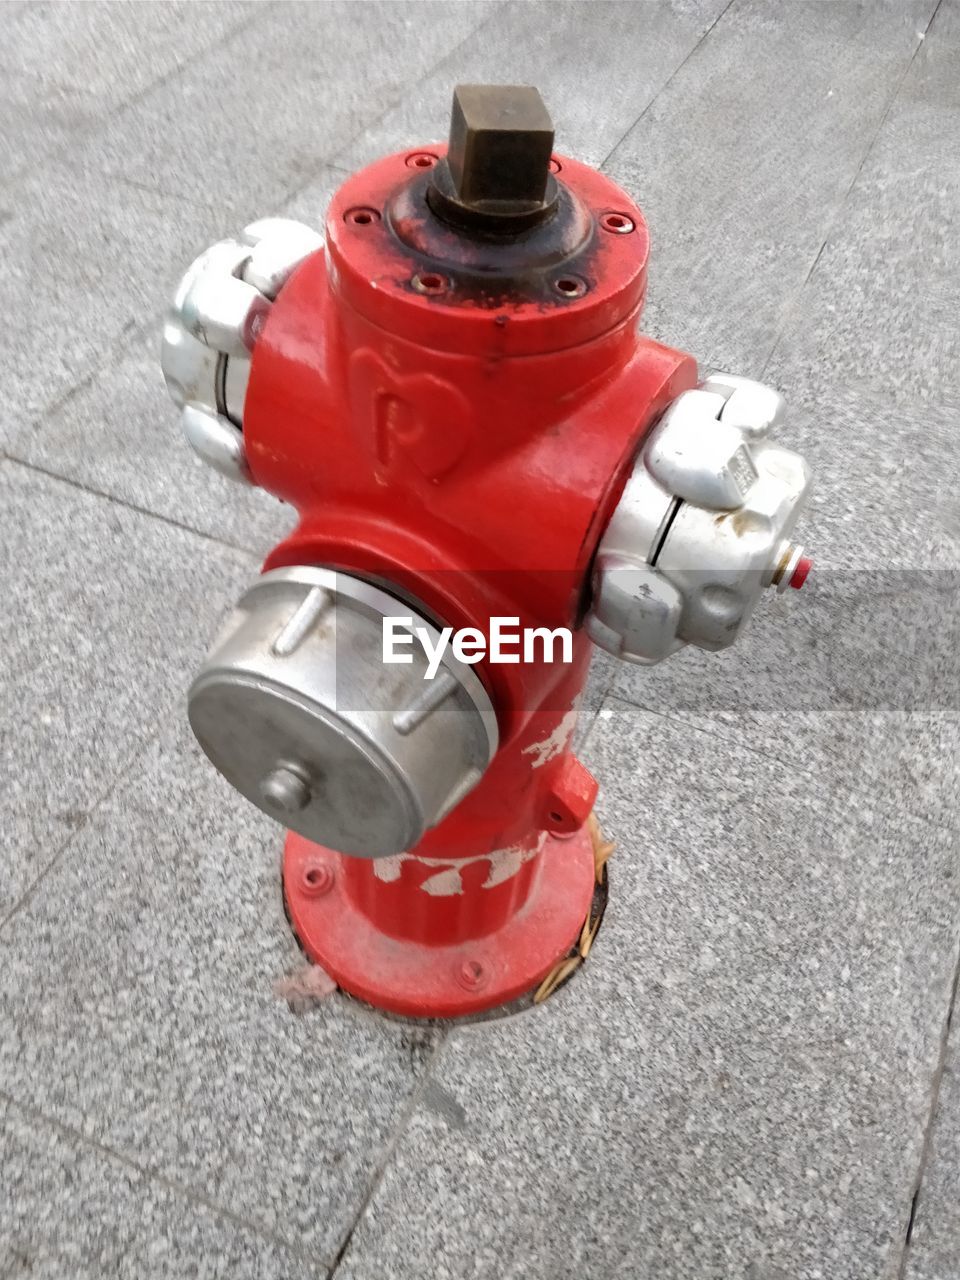 HIGH ANGLE VIEW OF FIRE HYDRANT ON ROAD